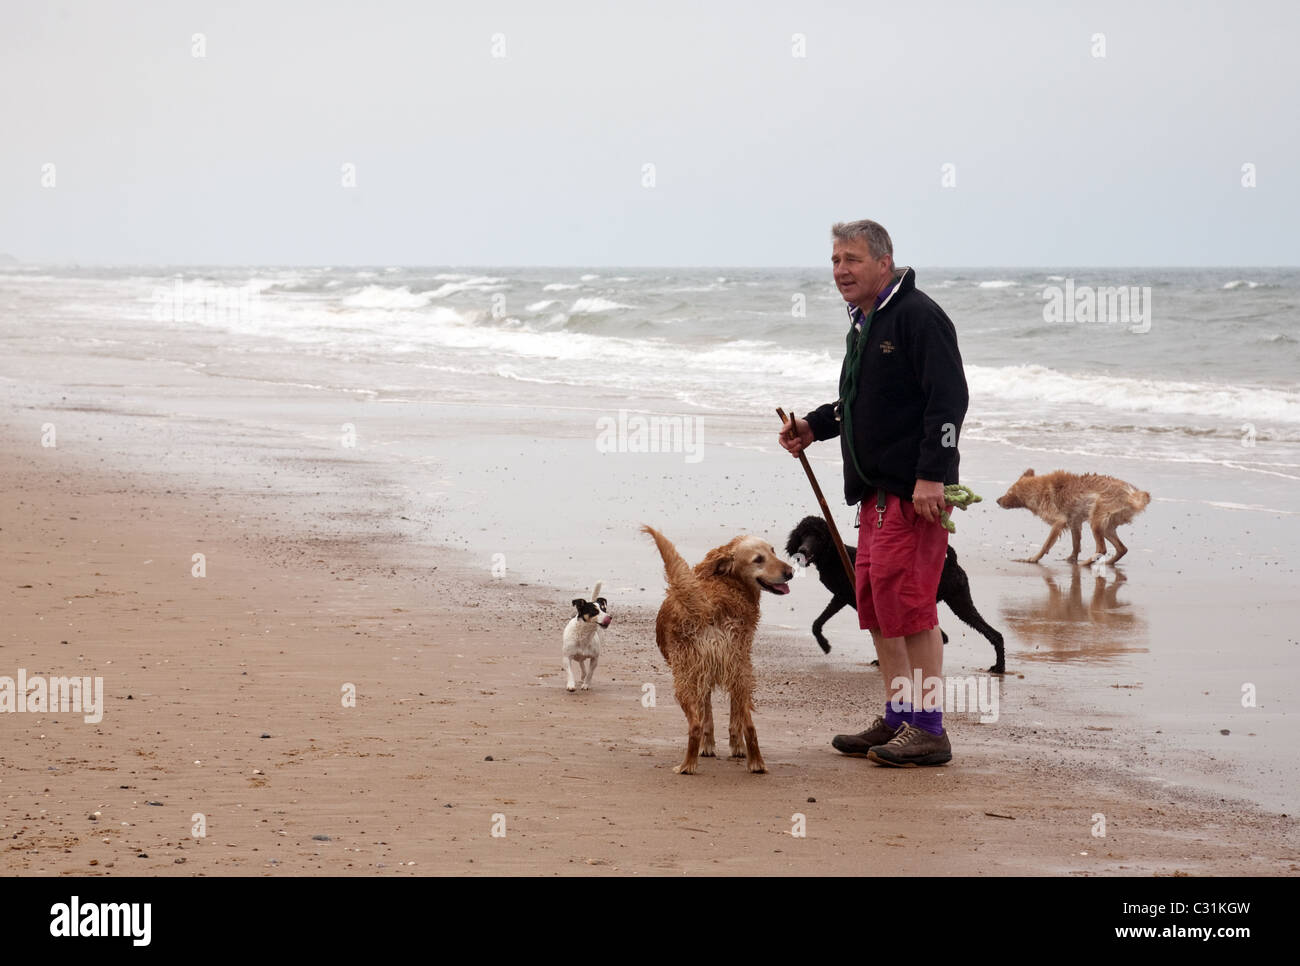 A man walking his dogs by the waters edge, Holkham beach, North Norfolk coast, UK Stock Photo